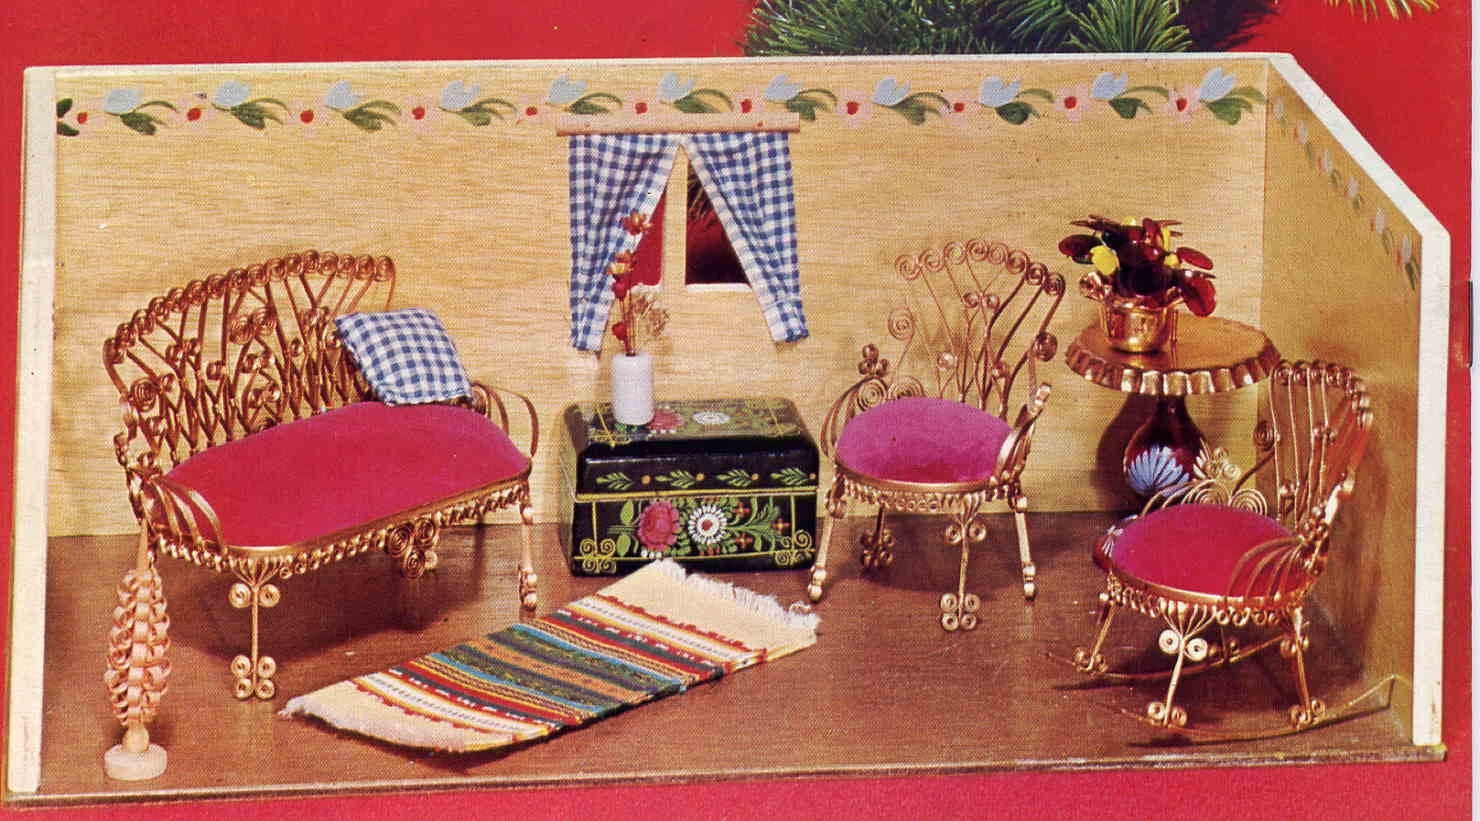 Vintage 1973 Tin Can Doll Furniture Craft Booklet--Gorgeous Scrollwork Style Metal Doll Furniture